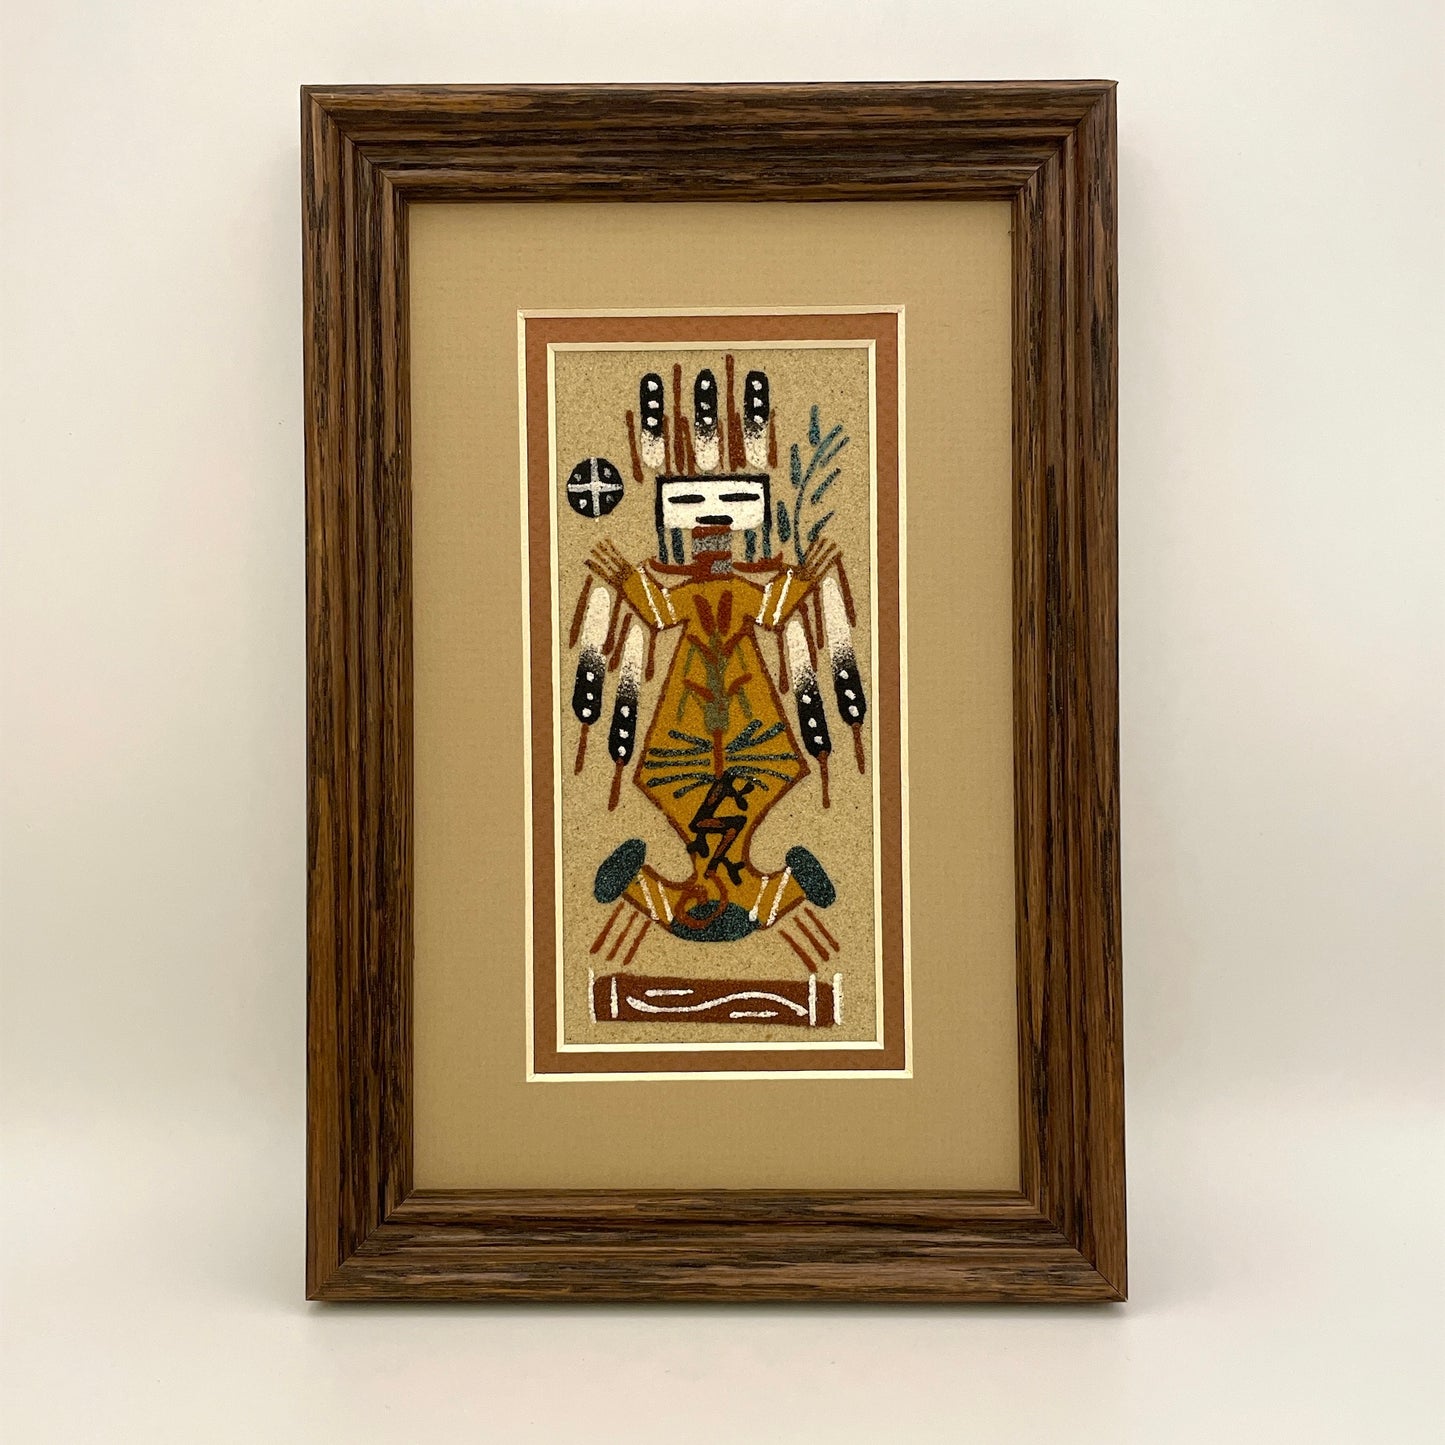 Navajo Sand Painting By Marlene Doby 9" x 6"